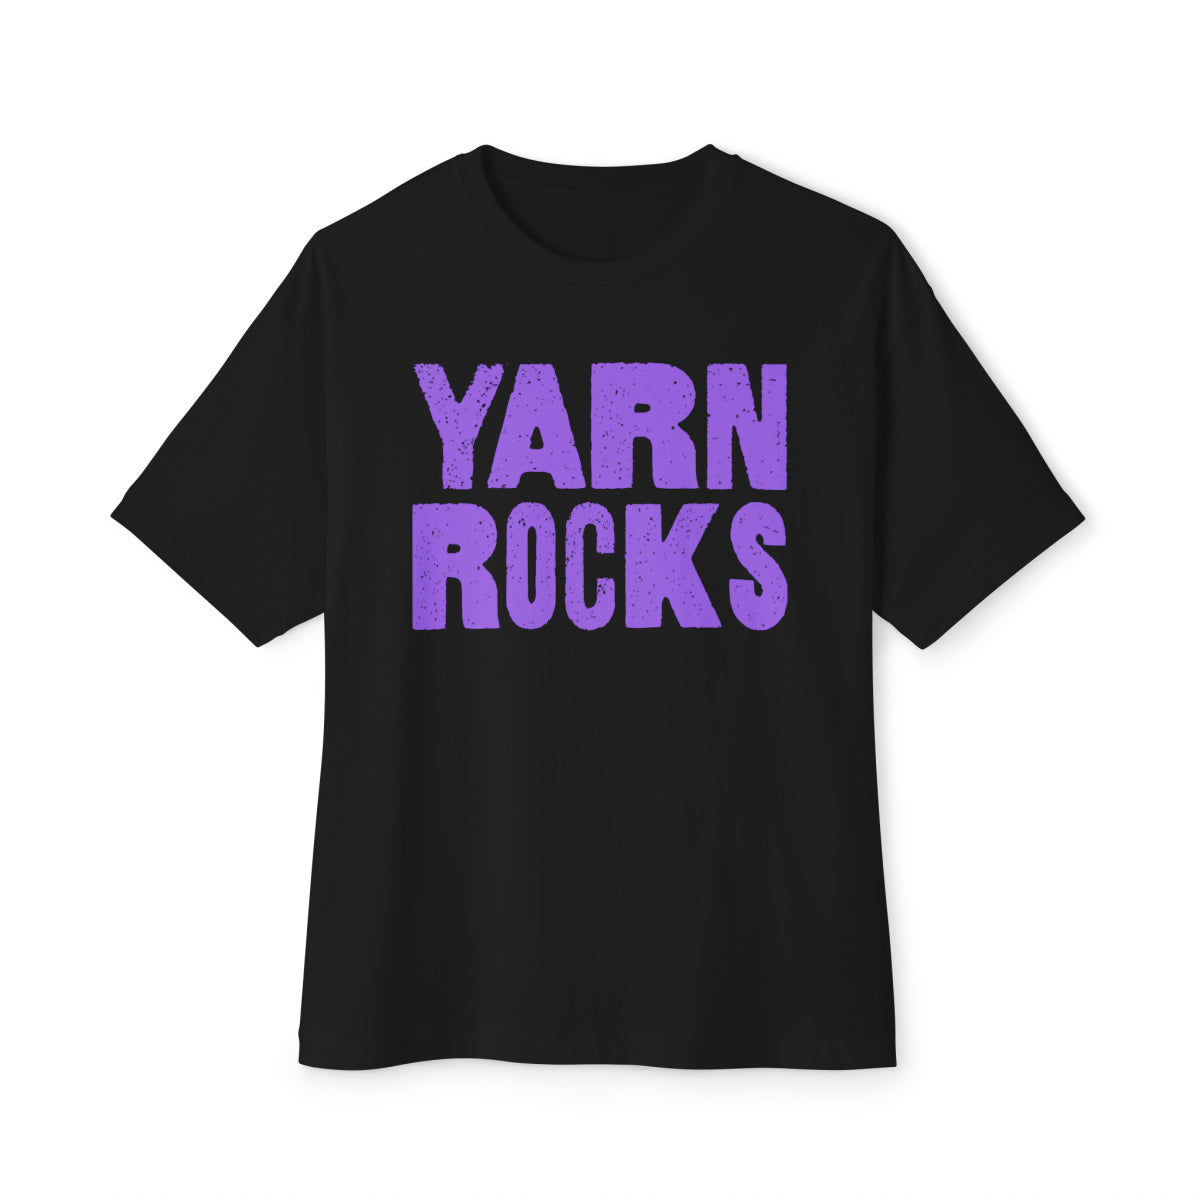 YARN ROCKS Unisex Oversized Boxy Tee - A Comfy, Cotton, Relaxed-Fit Shirt - 30+ colors & 7 Sizes